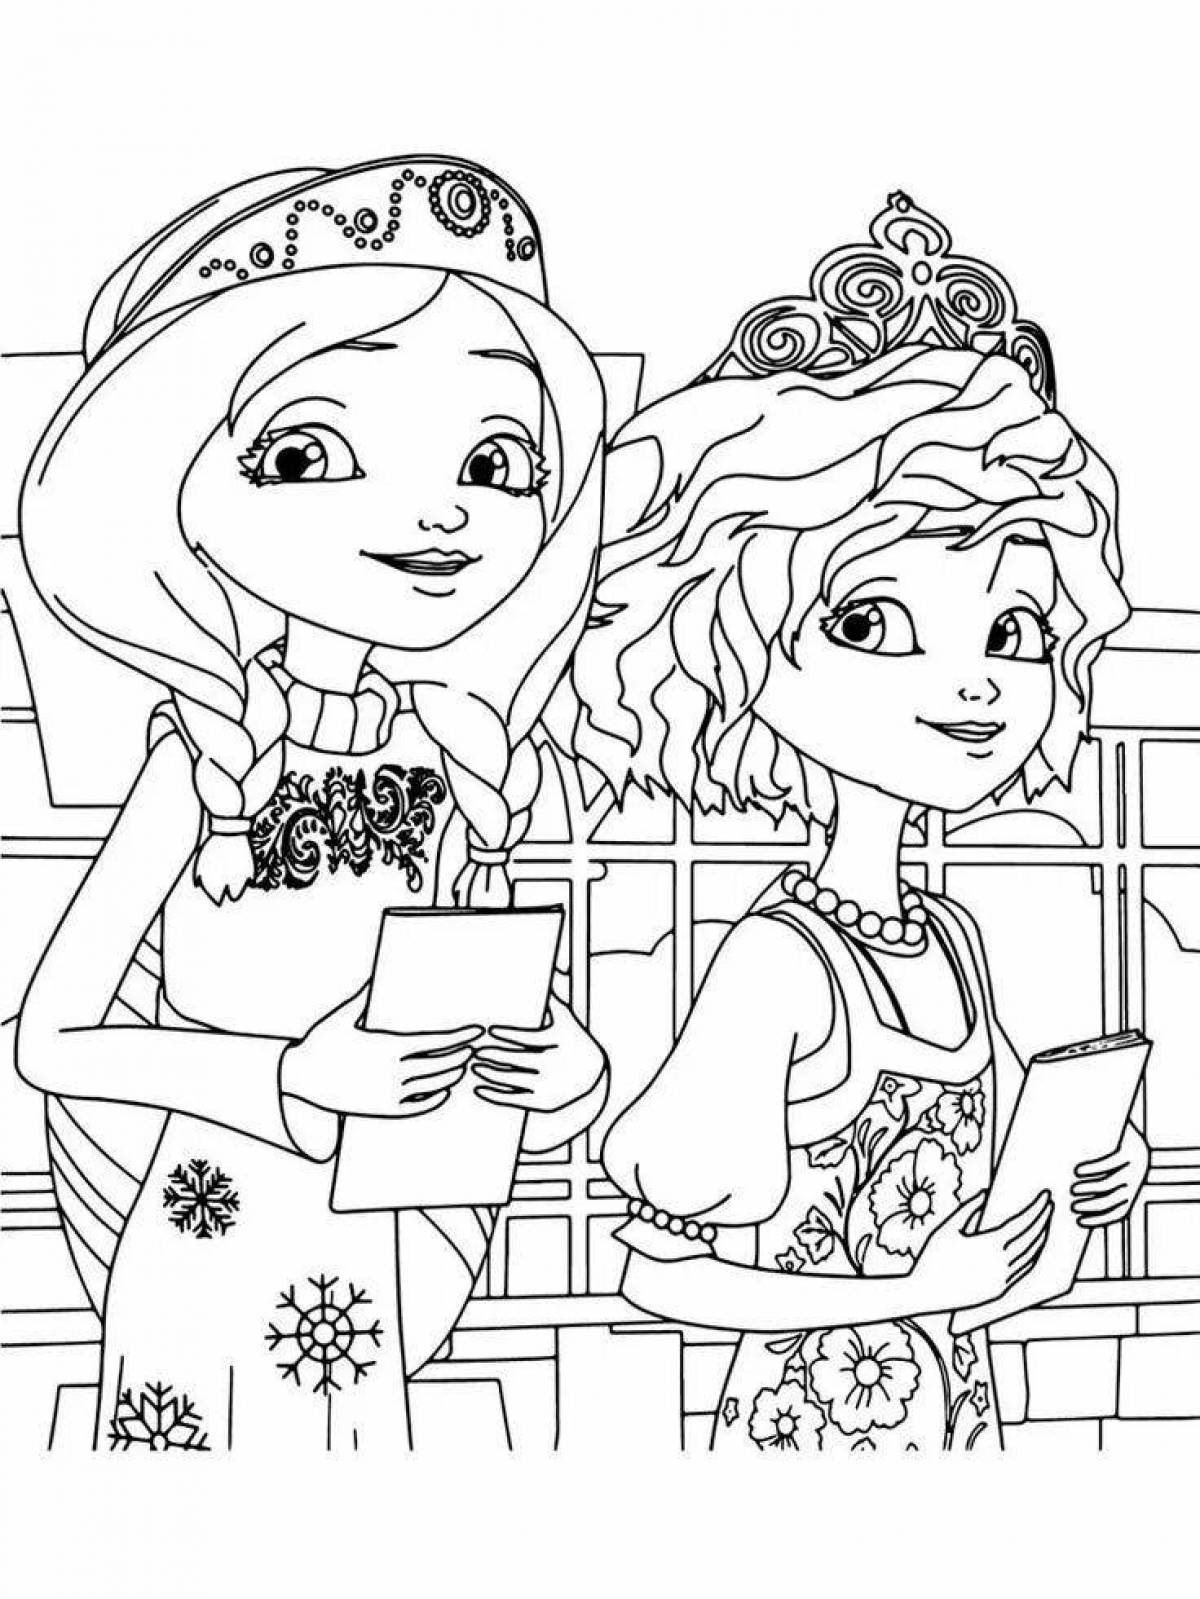 Coloring book for girls 5-6 years old from cartoons